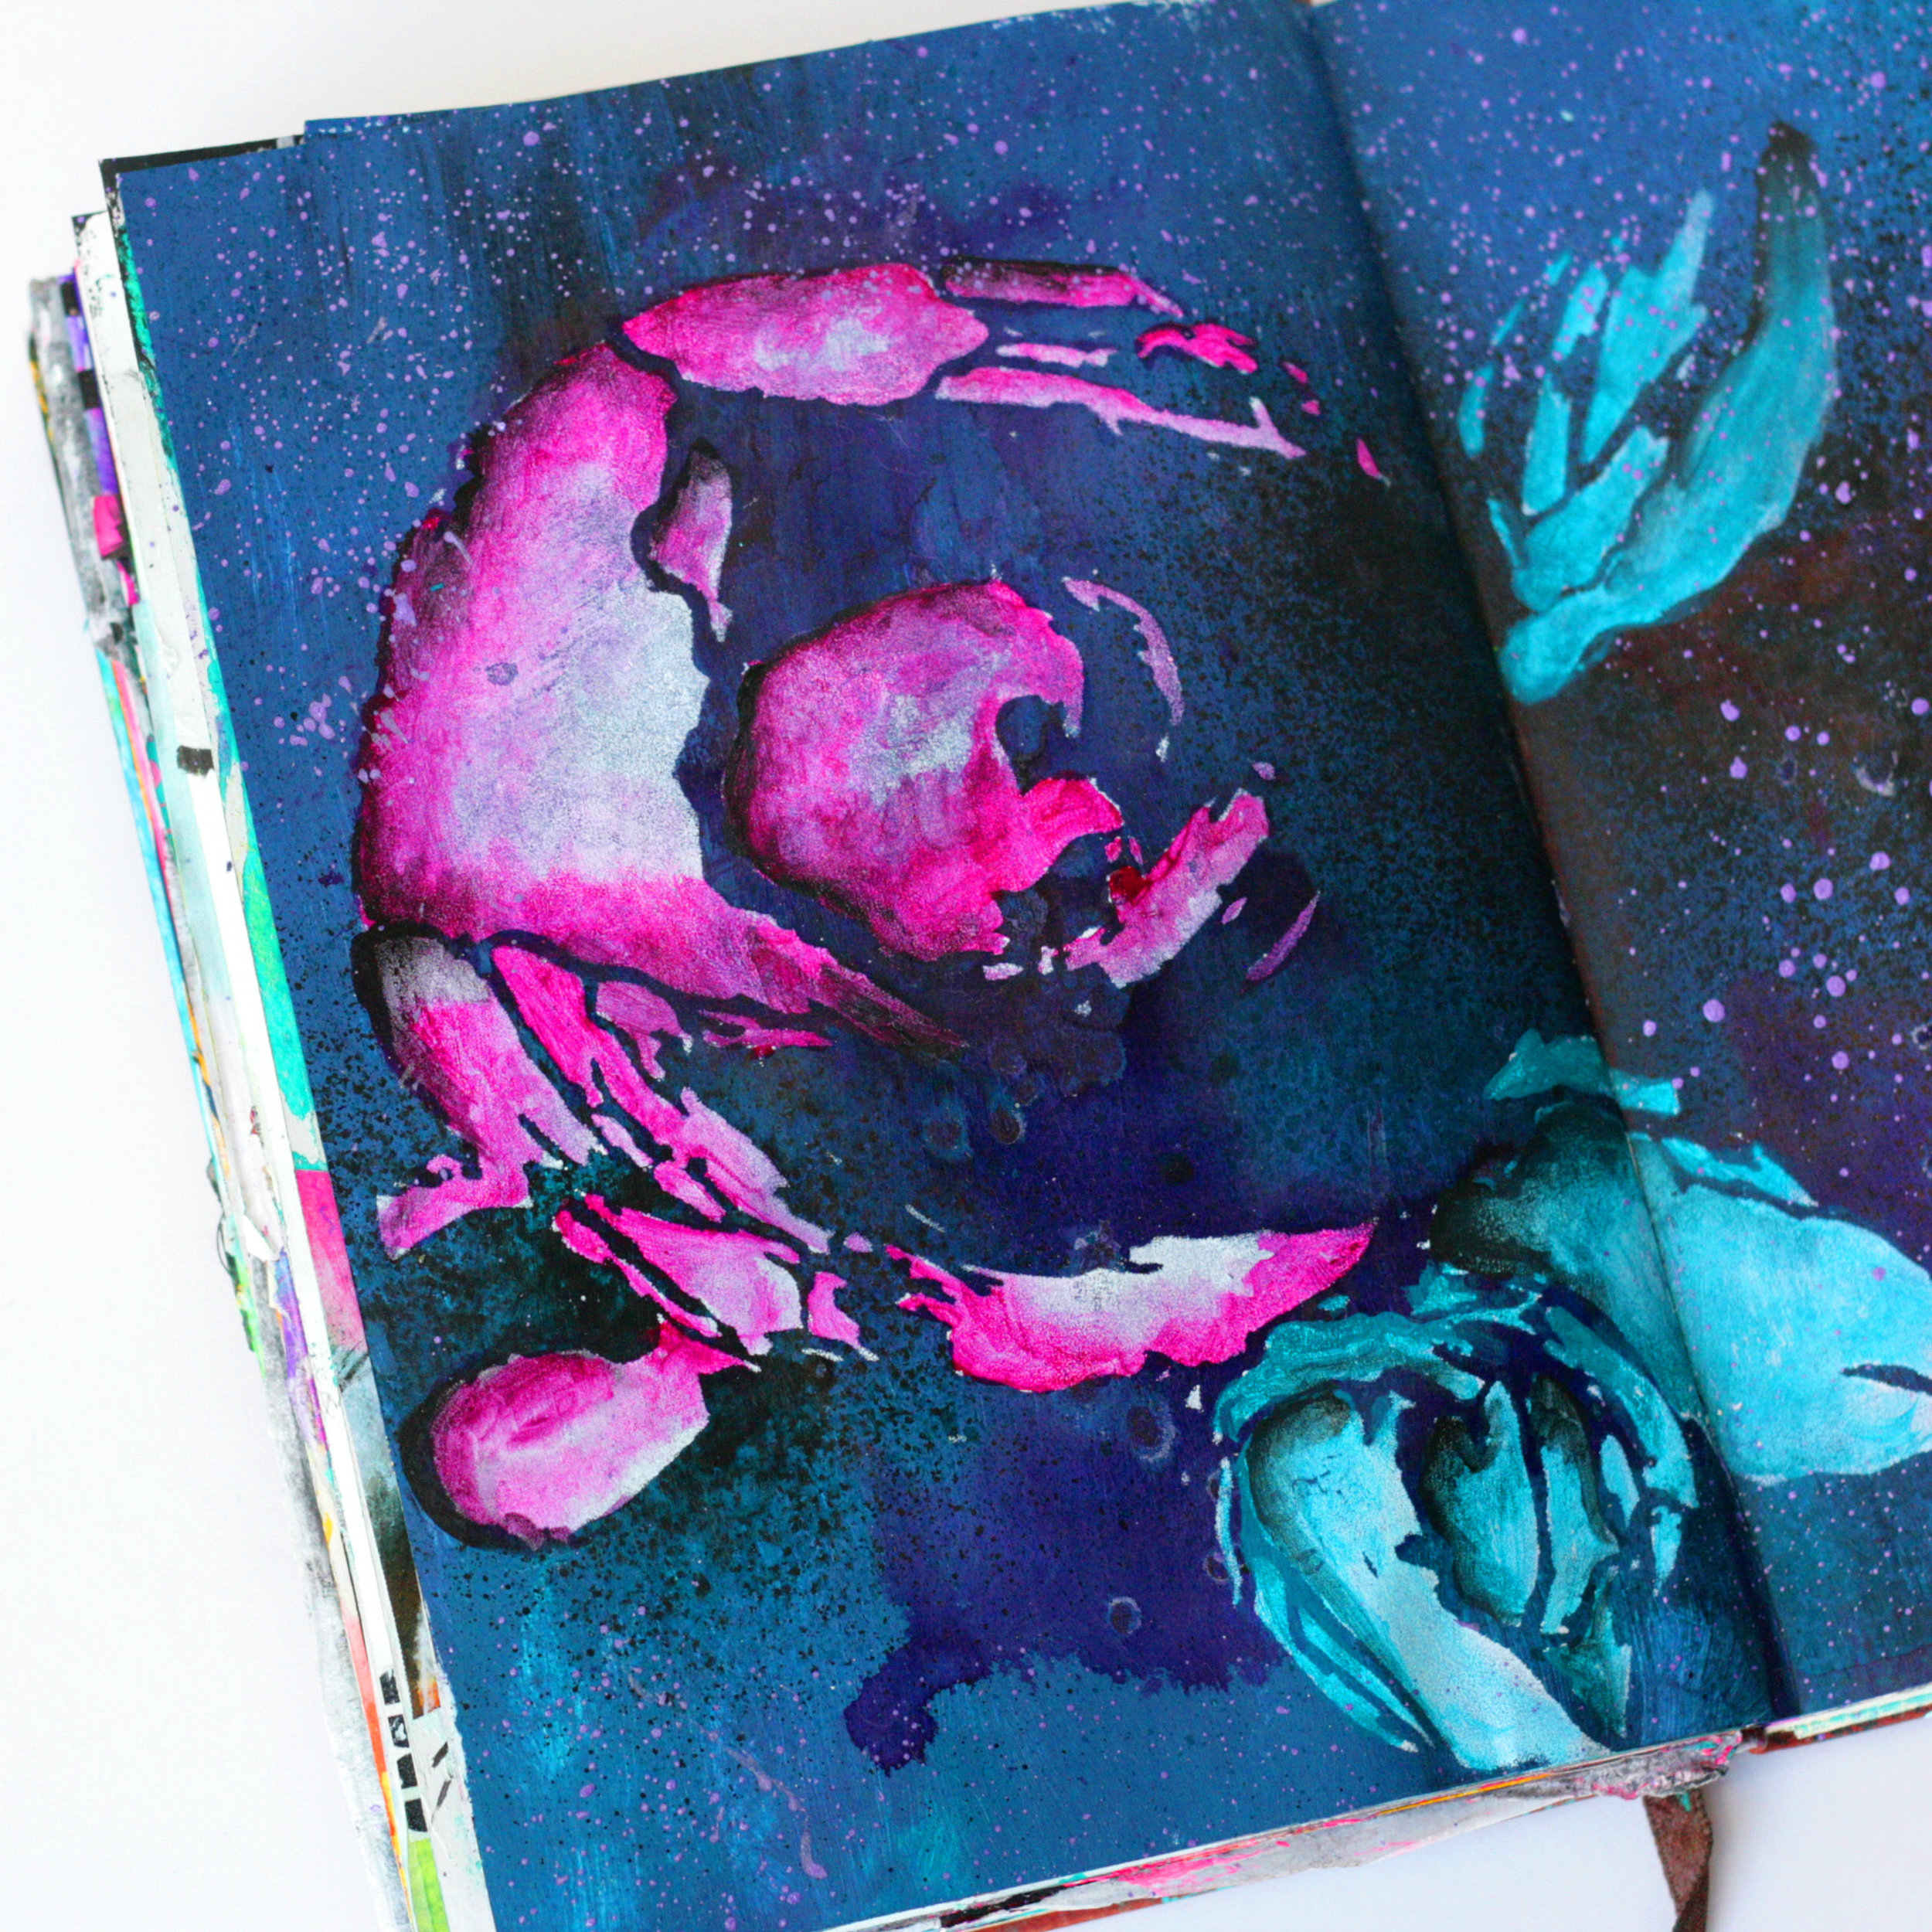  I'm sharing a mixed media art journal today made using a stencil from Donna Downey designs. Watch my process video and stencil techniques on my "Silently Thought" art journal spread @kareng #mixedmedia #artjournal #journalprocess 